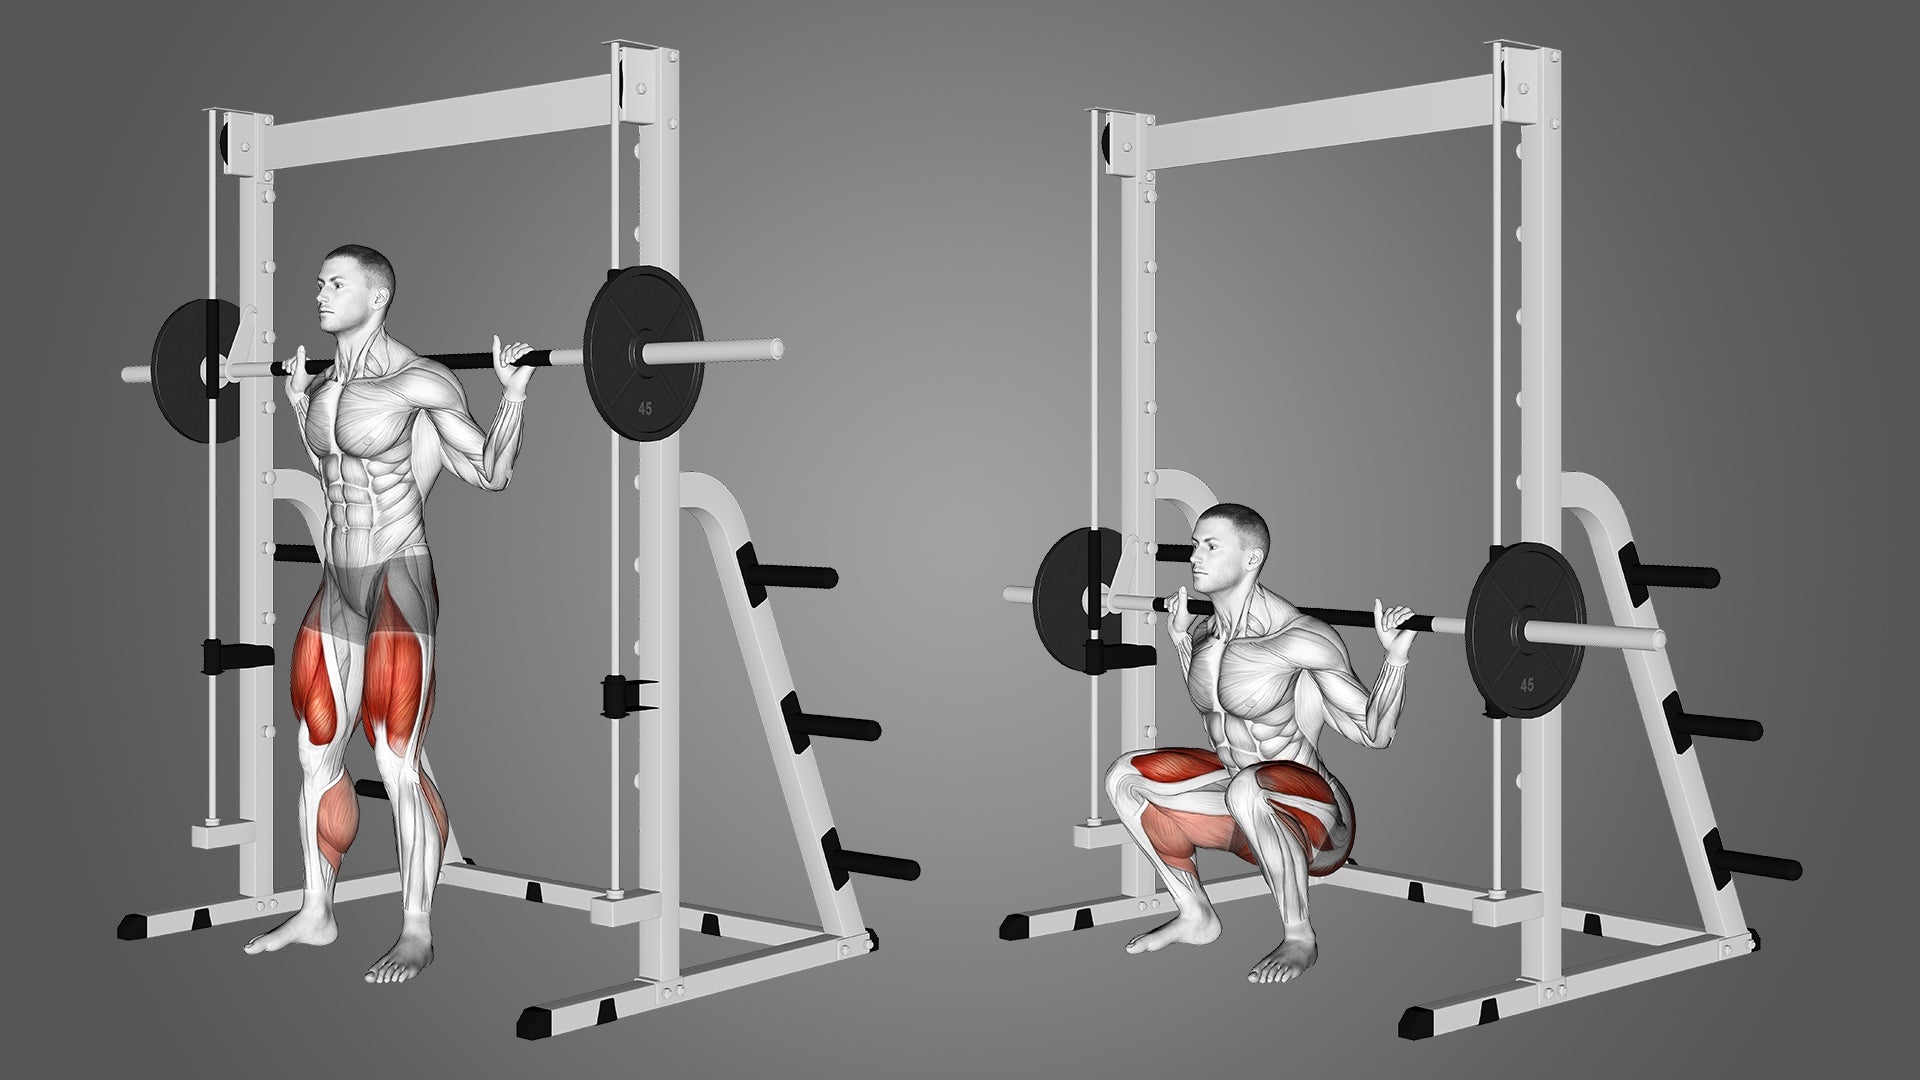 Does an Angled or Vertical Smith Machine Suit Your Needs